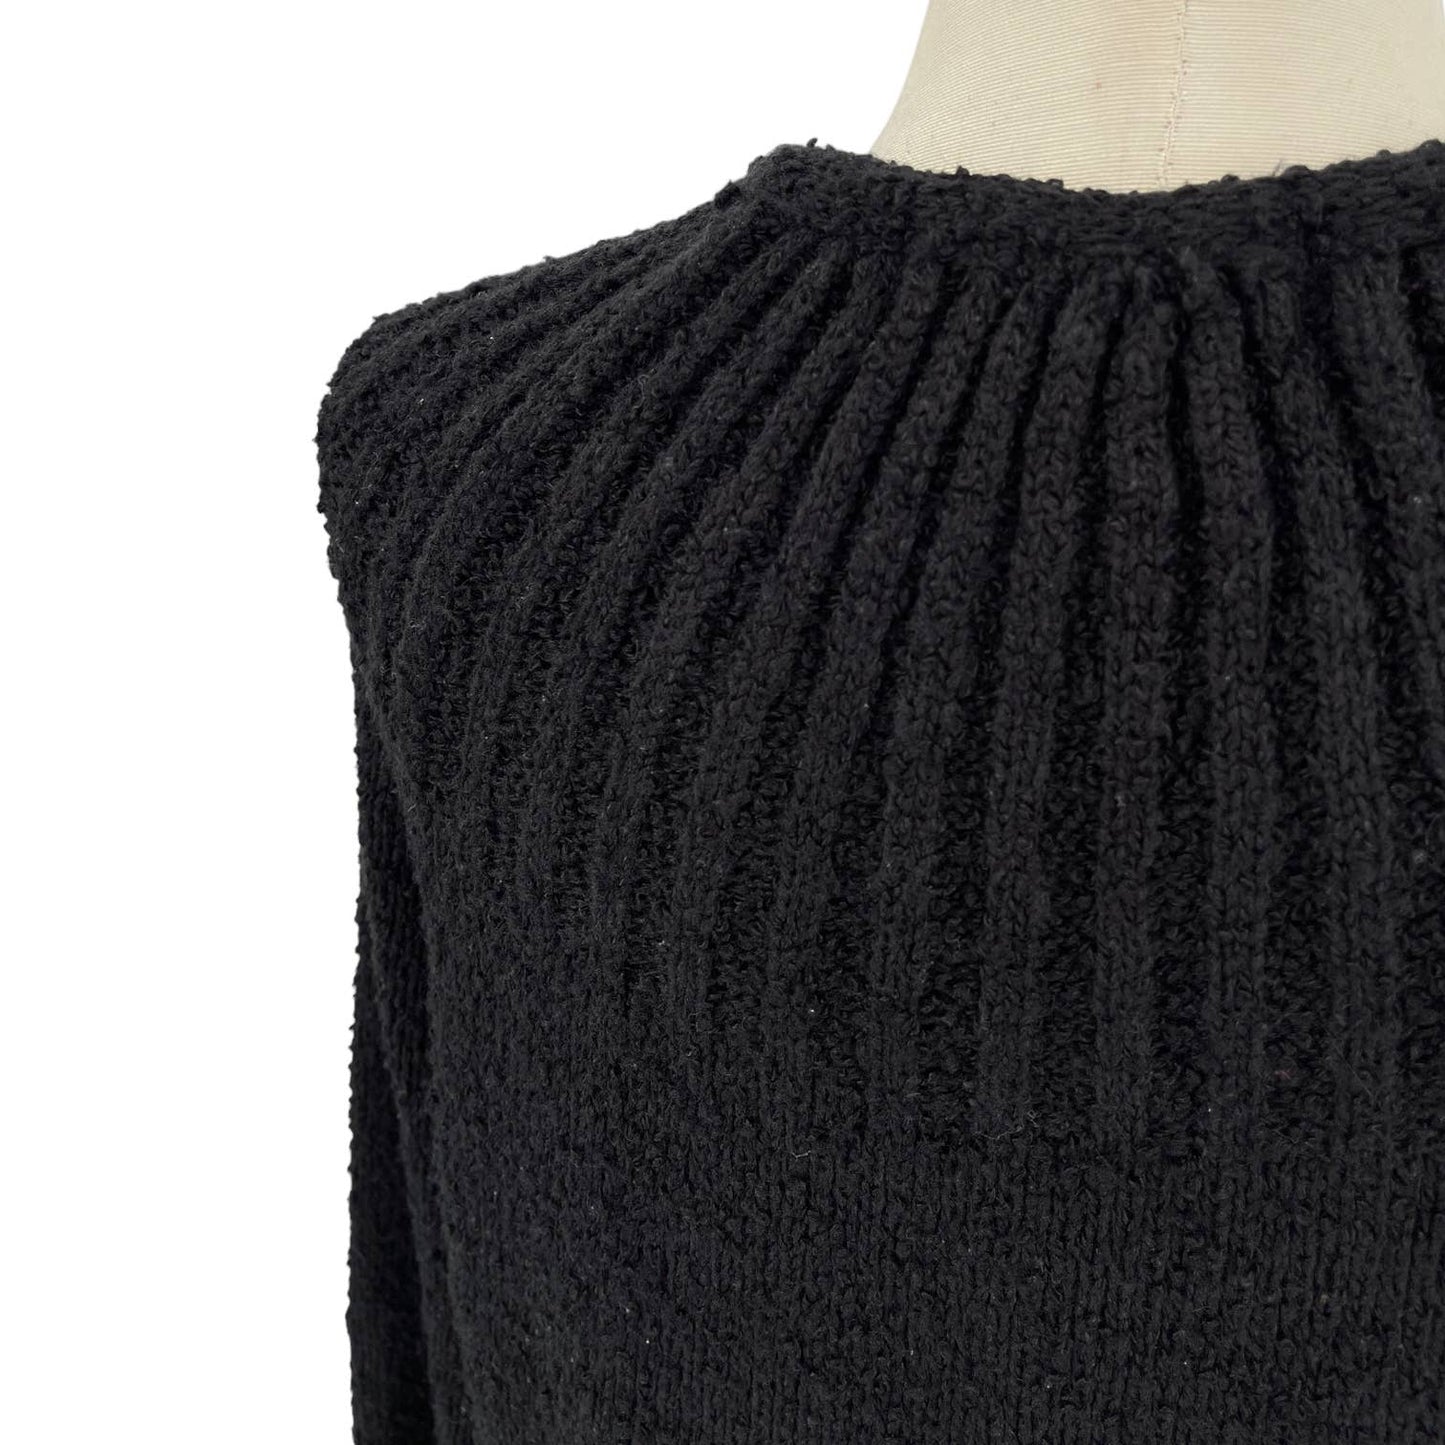 Vintage 80s Black Nubby Cardigan Sweater Open Front by Le Chois II Size 40